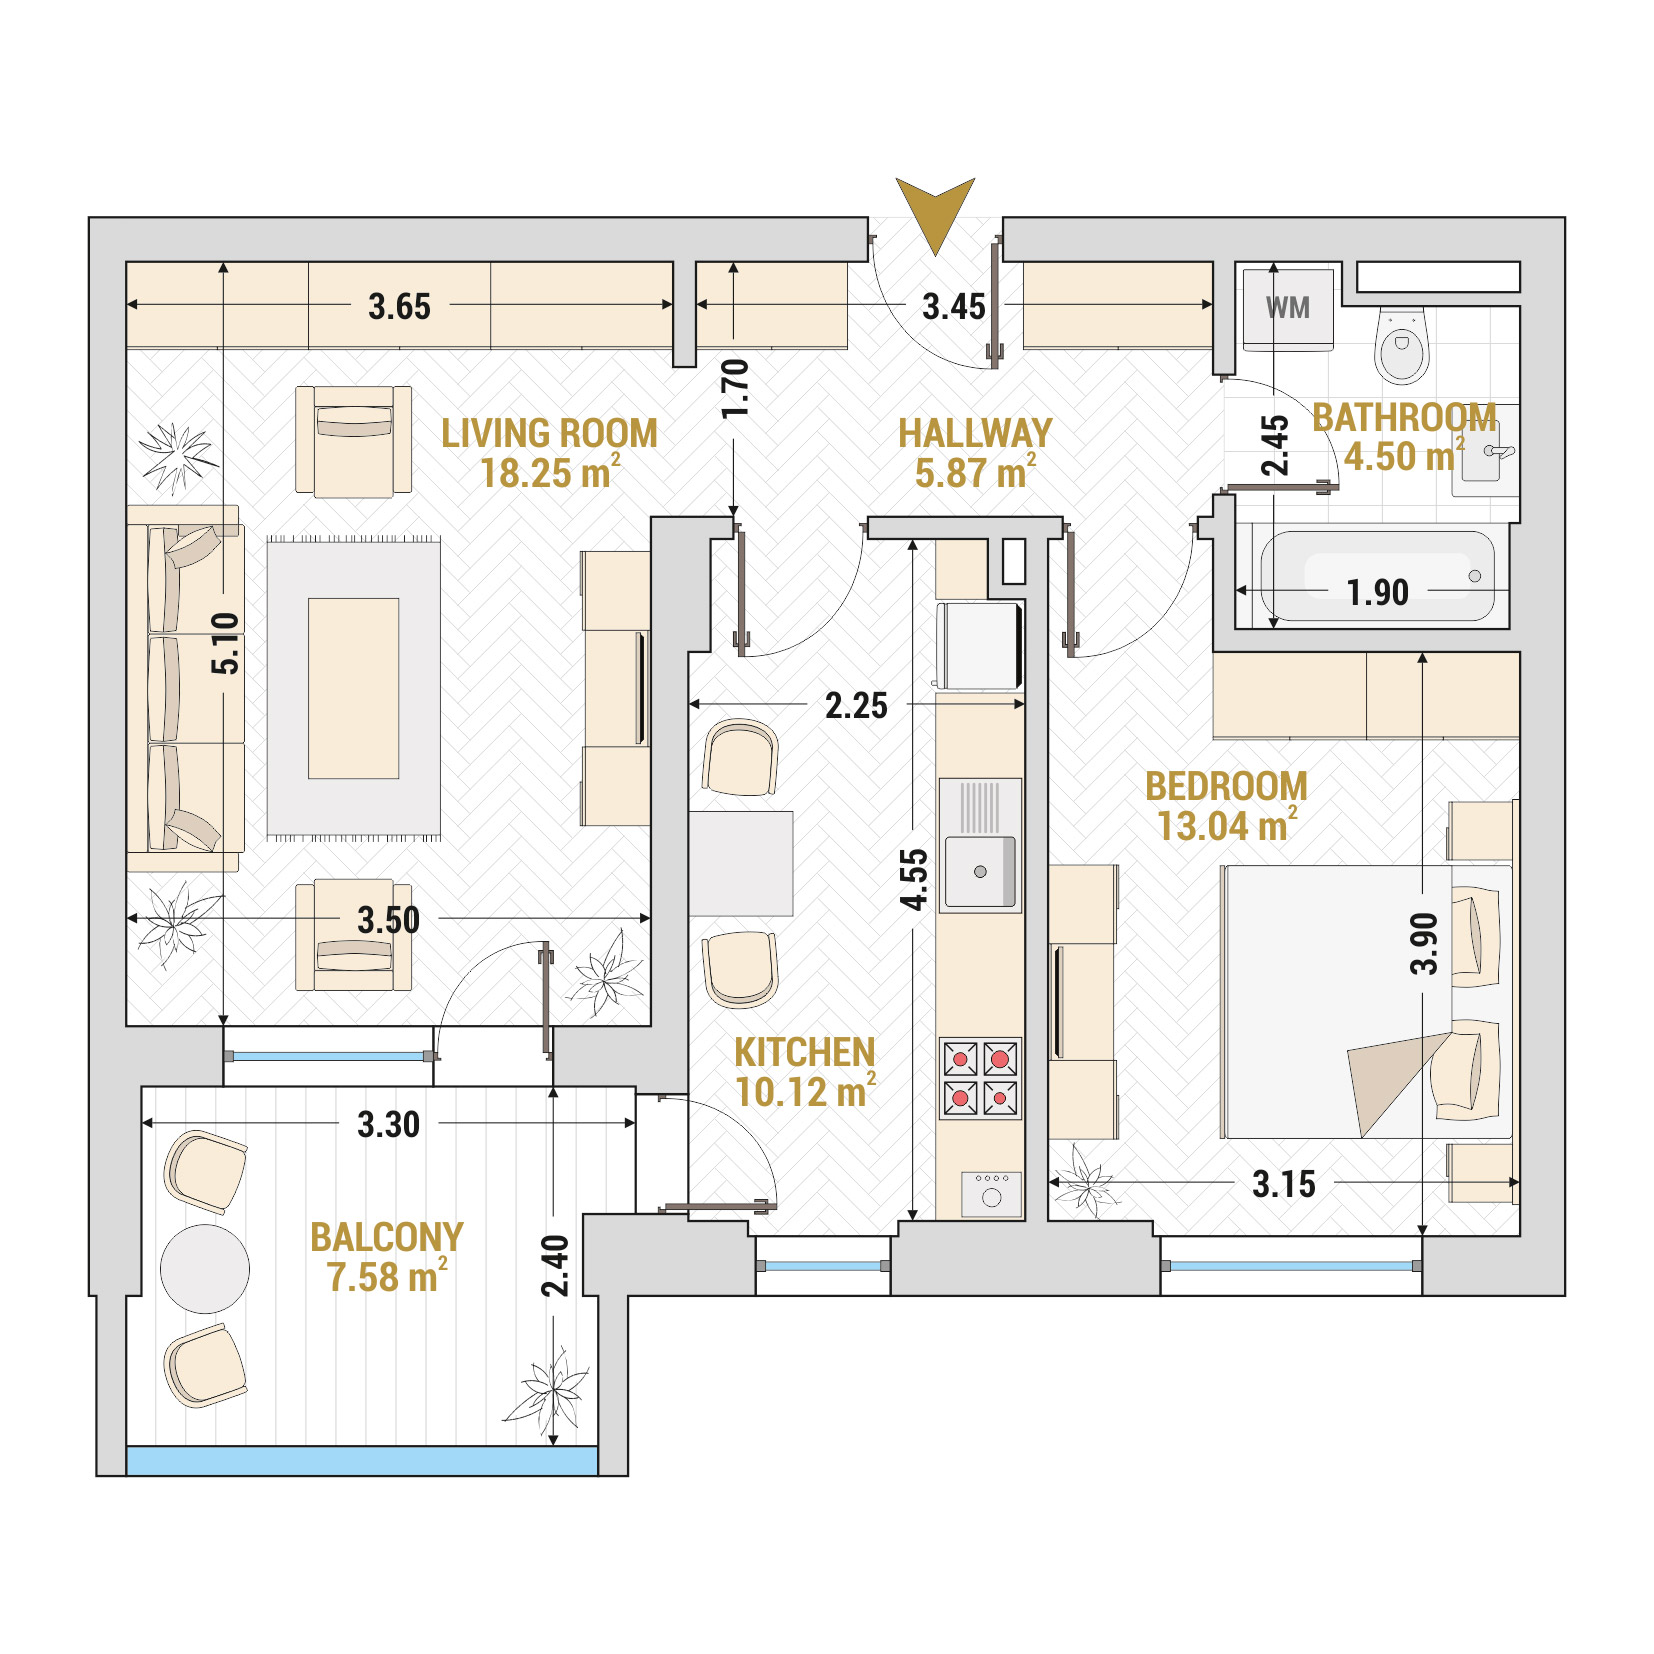 2 Room Apartment Type 2 Building 1 - Drumul Taberei Residence - Bucharest apartments for sale - Total useful area - 59.36 mp